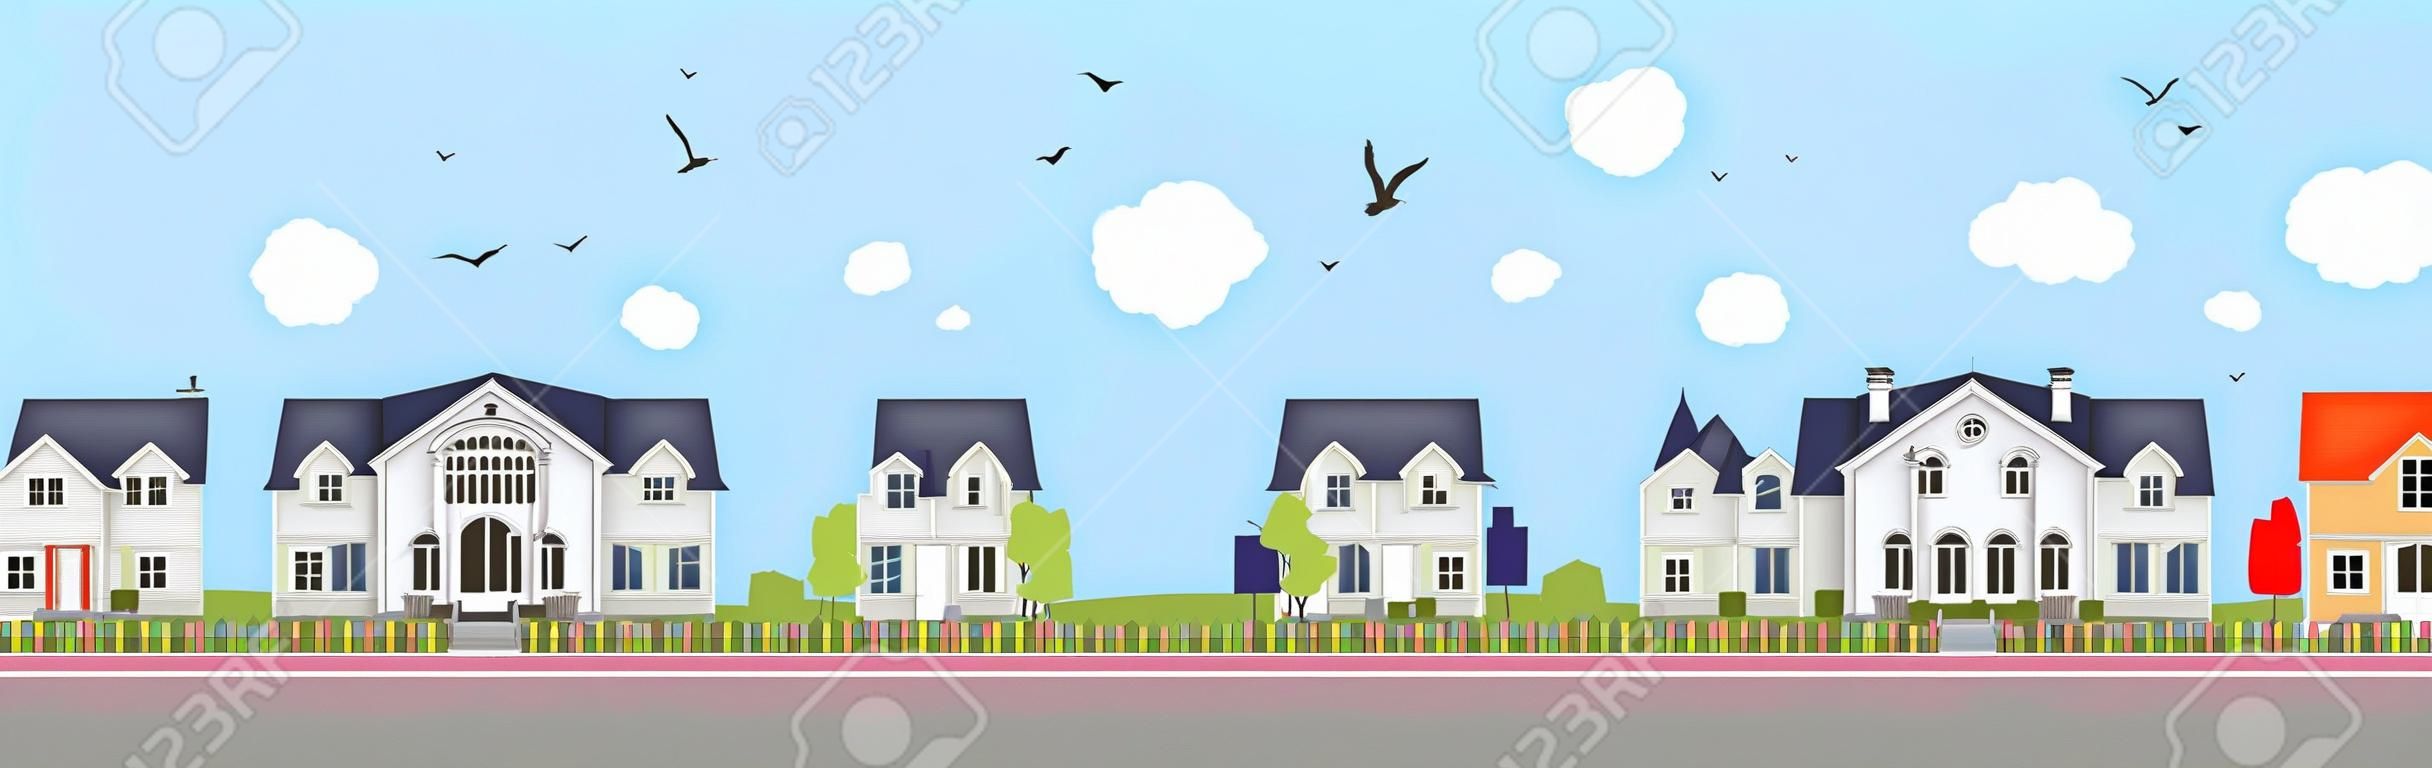 Row of different colorful family houses. House home exterior.